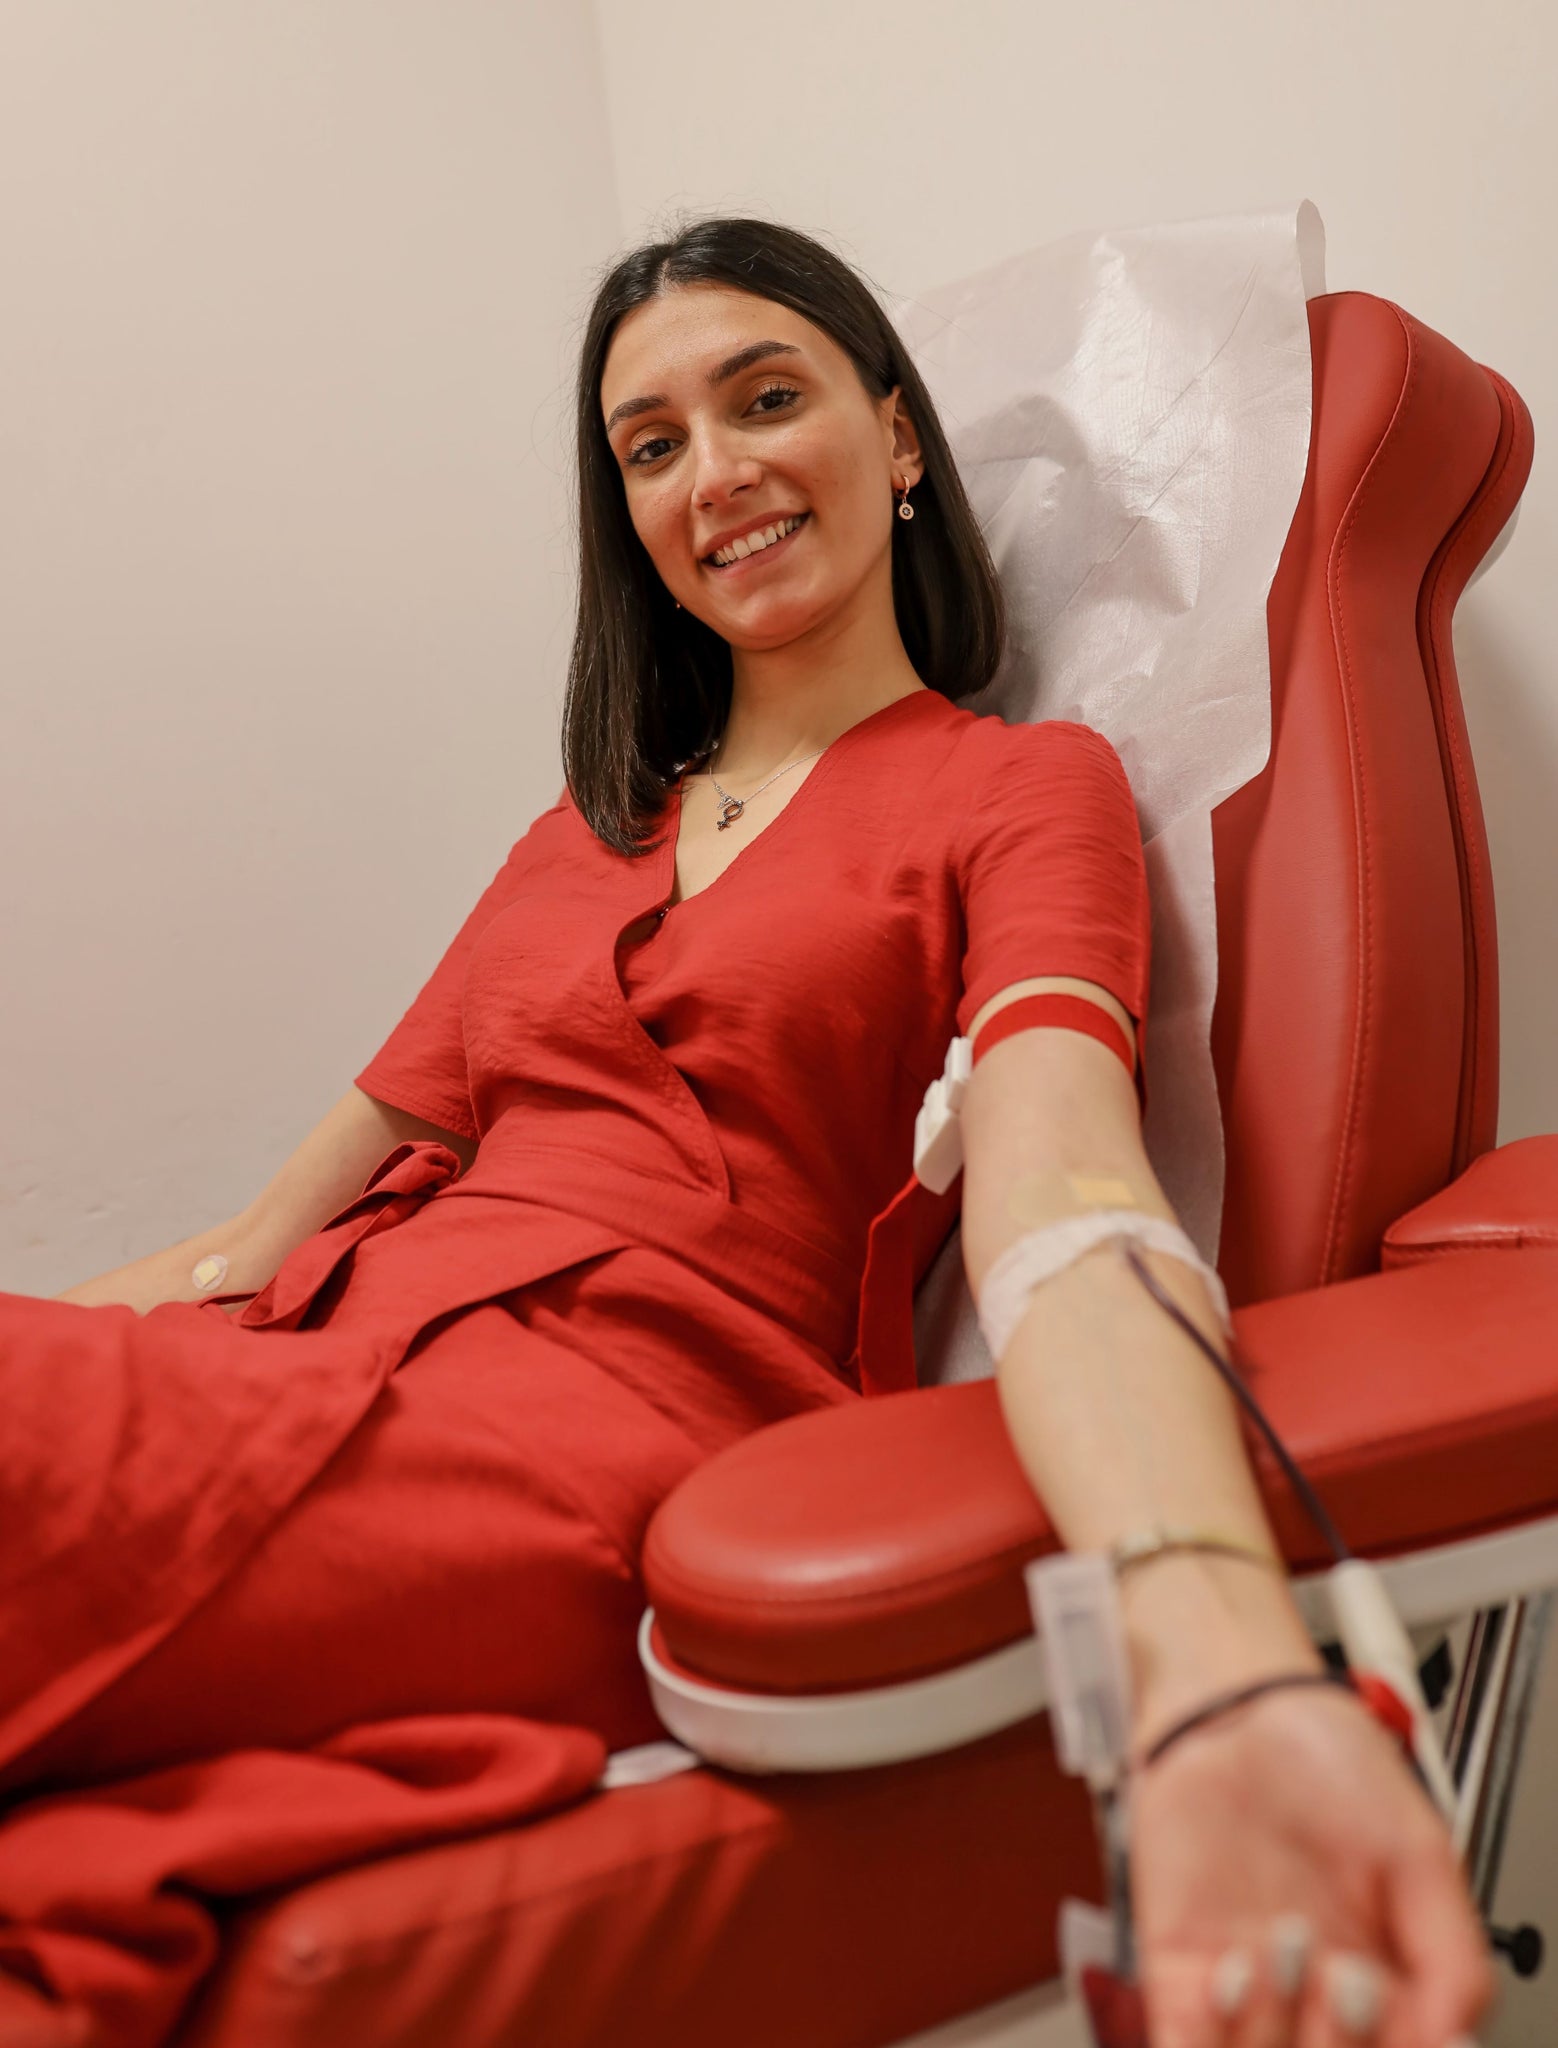 Tattoos  Donating Blood What is the Connection  Body Art Guru